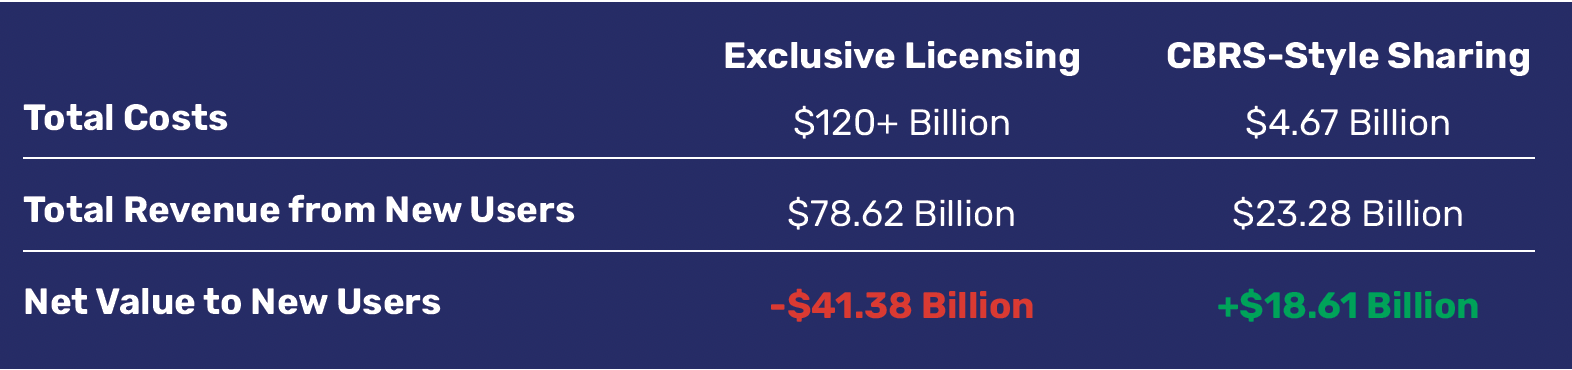 economic analysis shows exclusive user license costing the government $41.38 billion, while a shared approach earns the government $18.61 billion